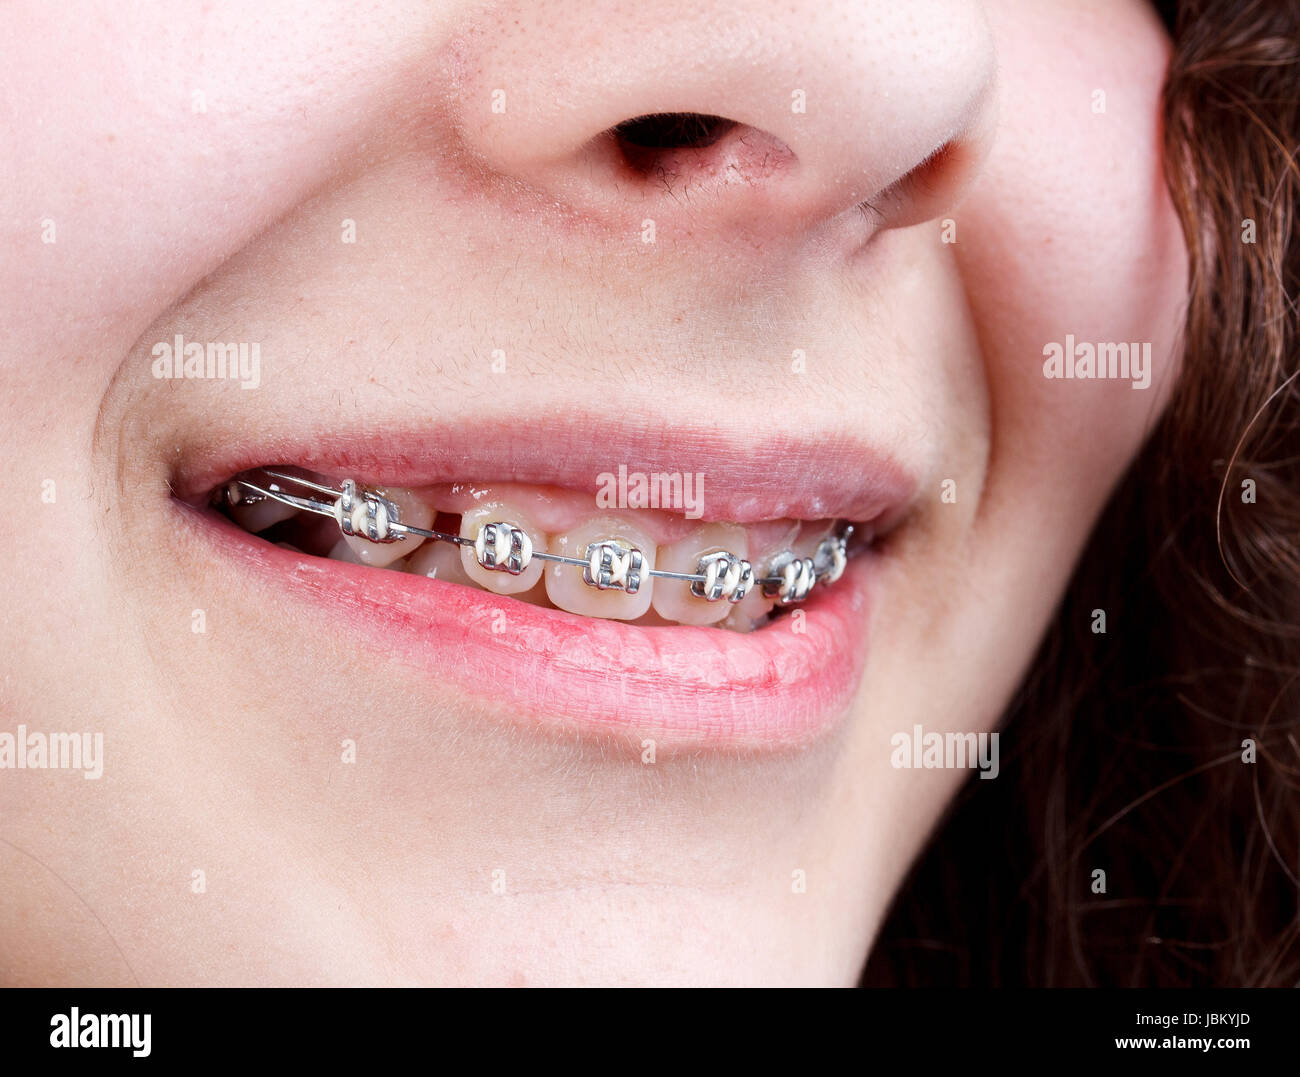 Young woman with brackets on teeth, close up shot Stock Photo